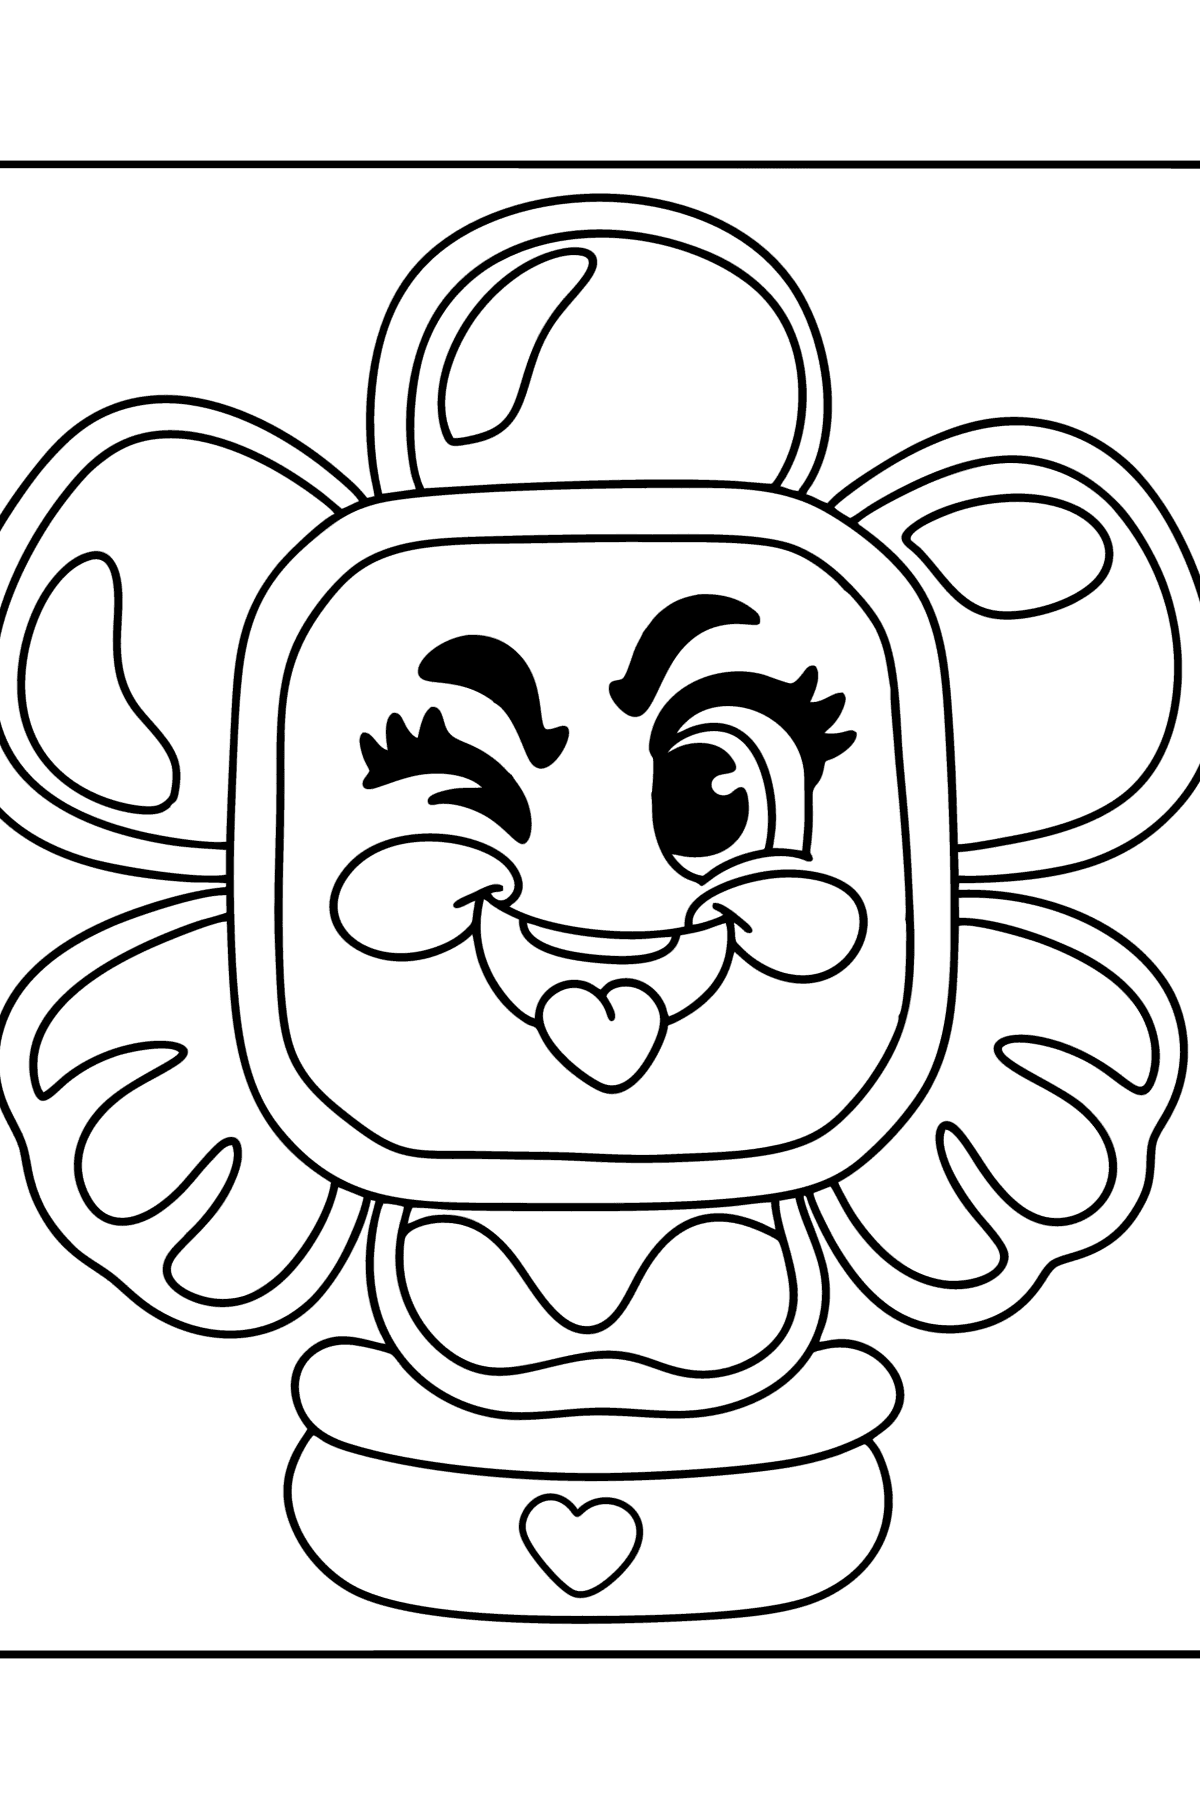 Coloring page MojiPops Flowy - Coloring Pages for Kids